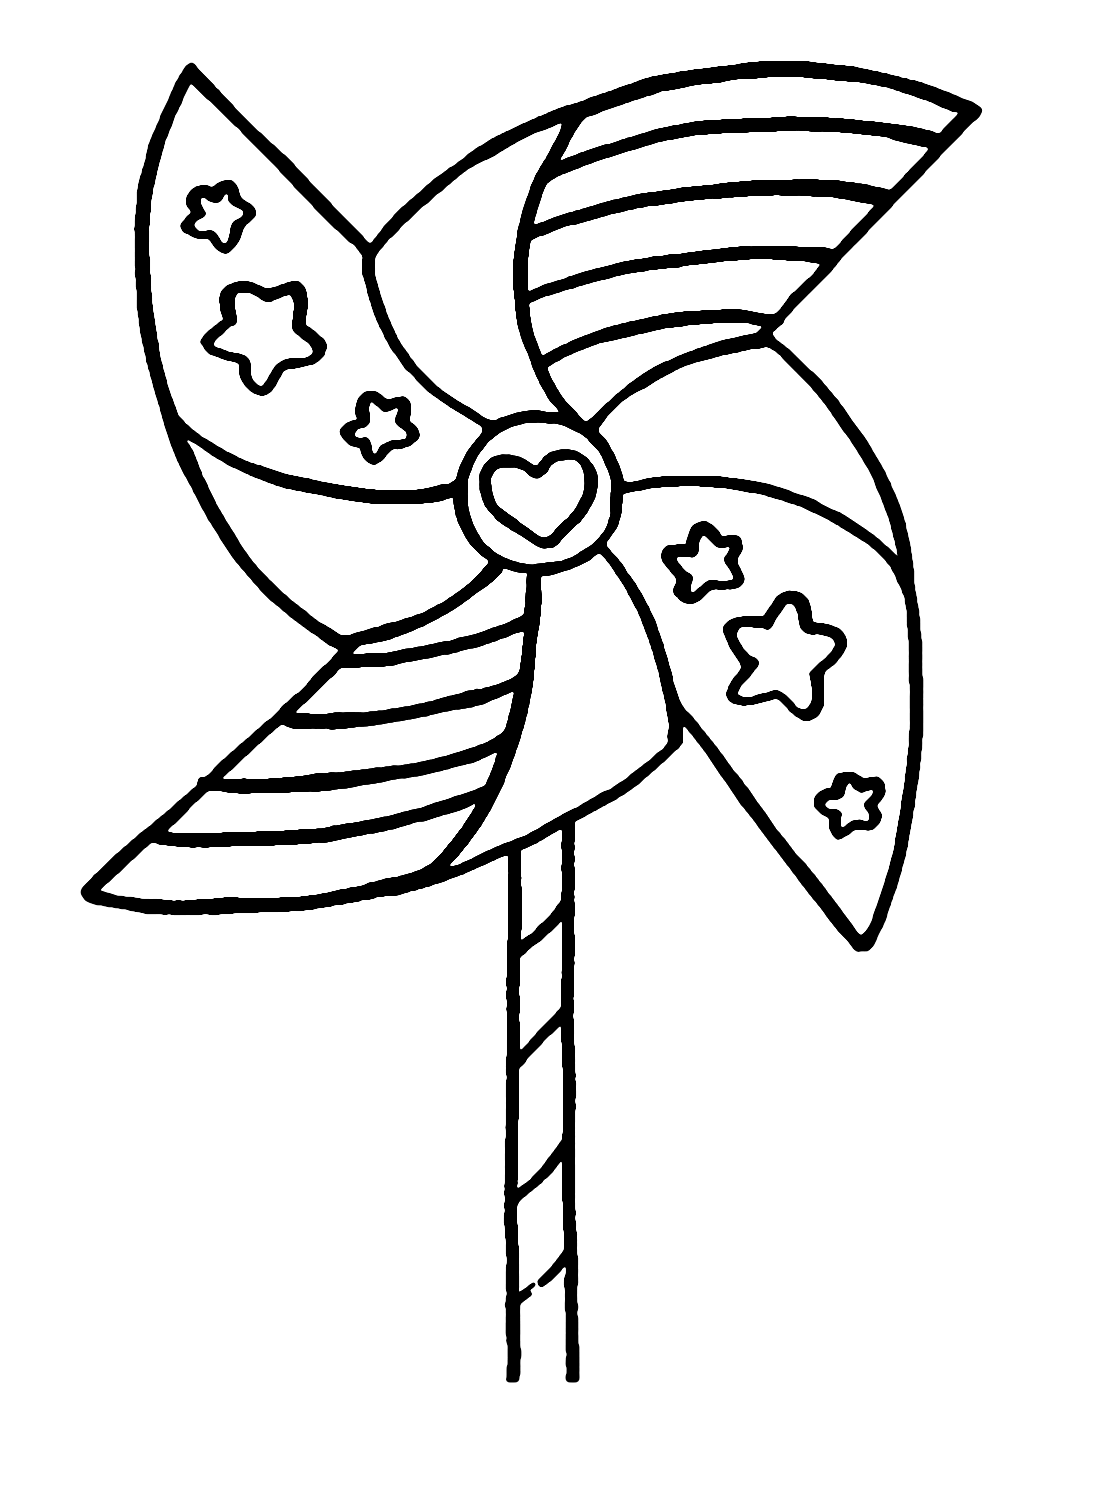 Pinwheel coloring pages printable for free download